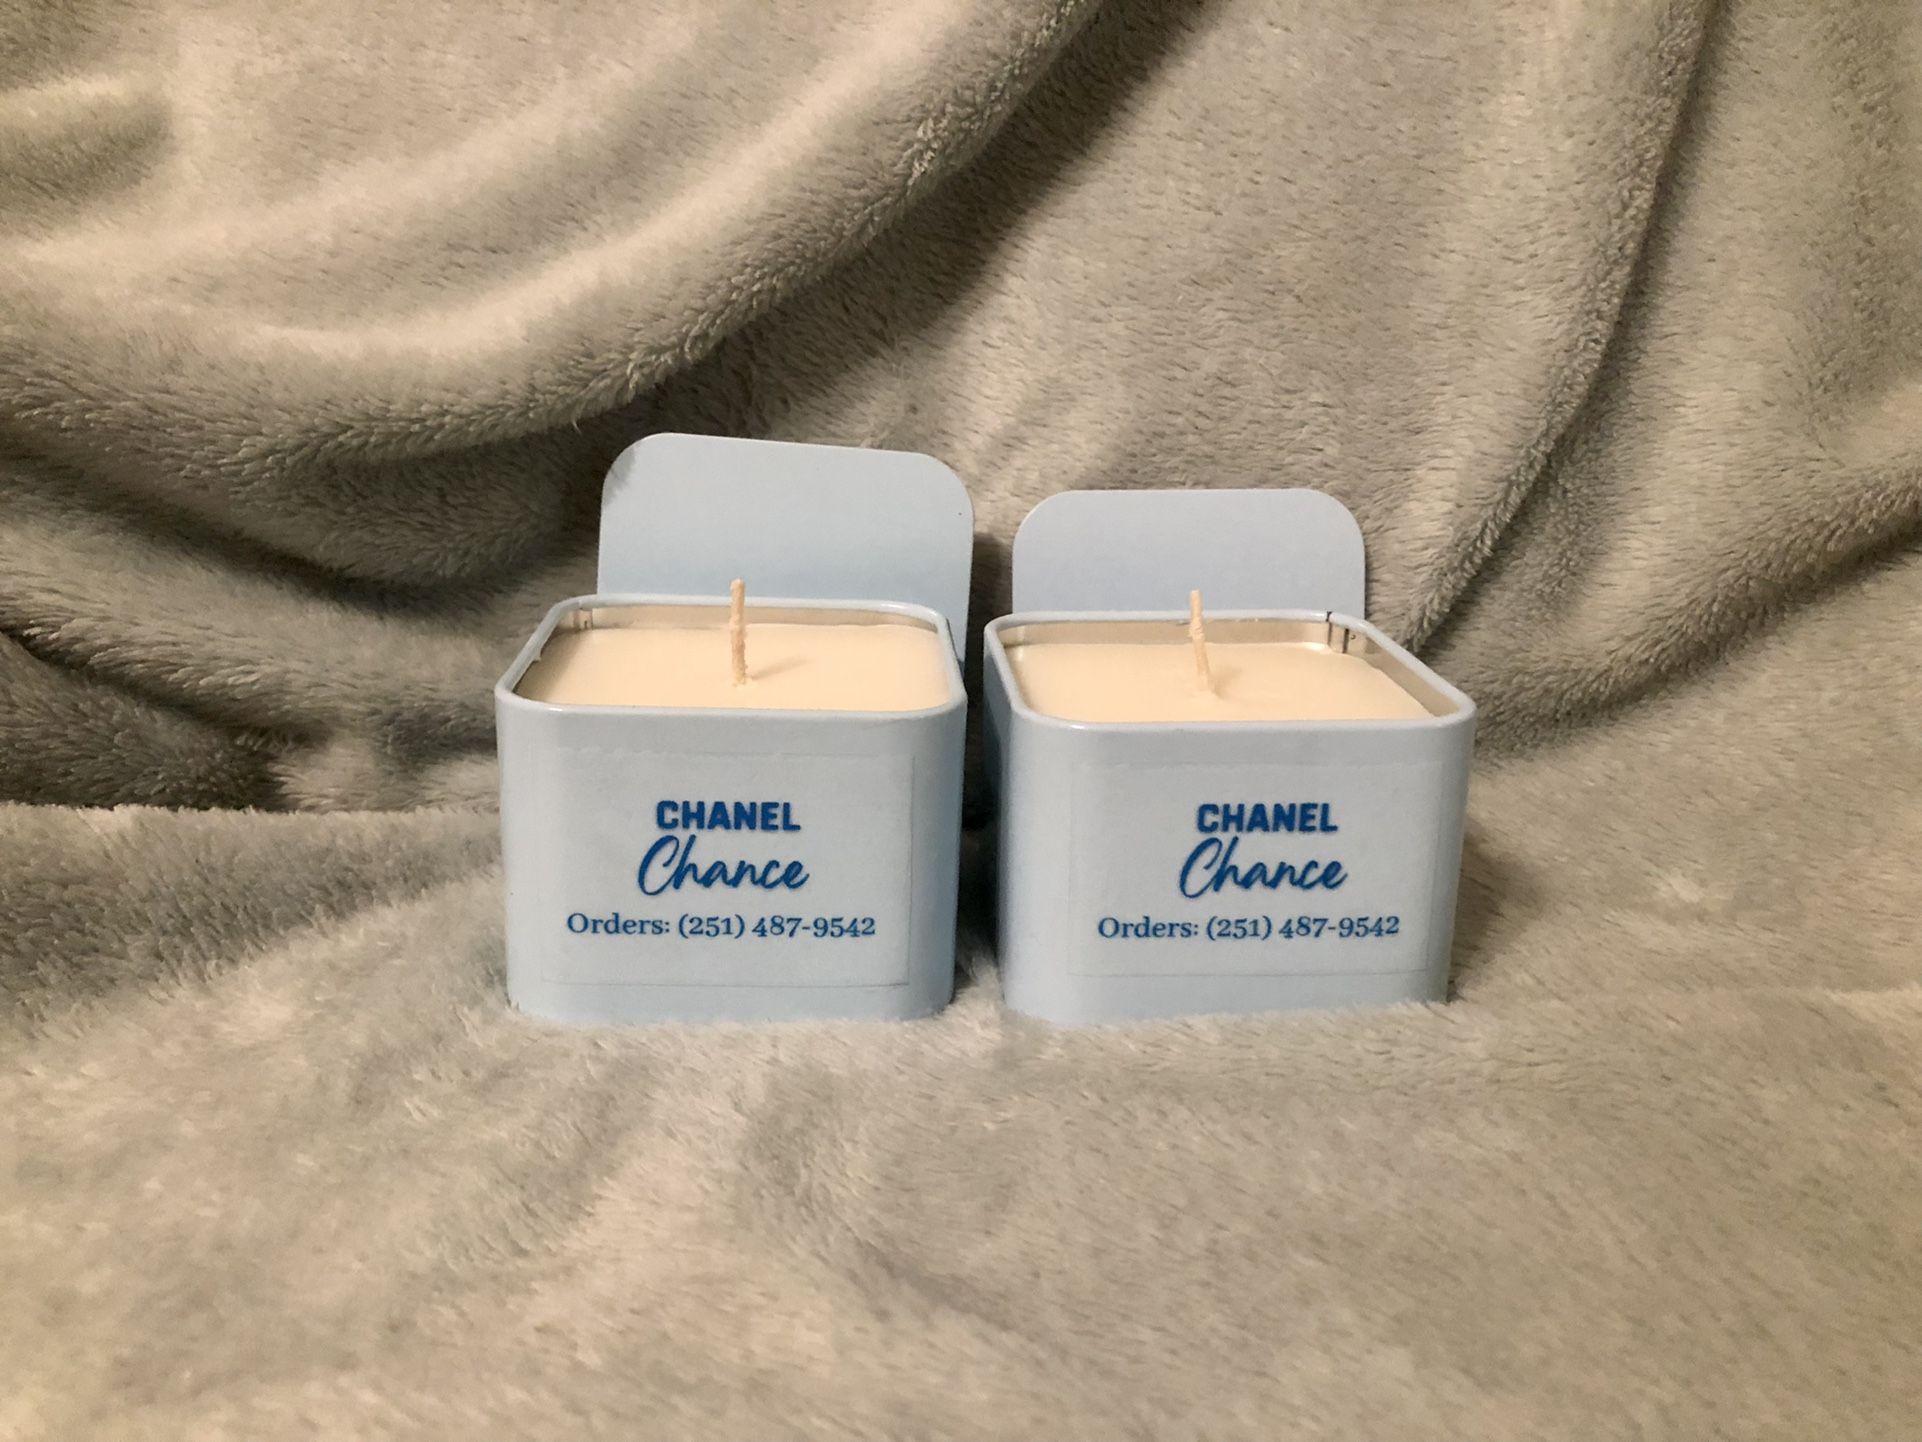 2 Chanel Chance Scent Candles